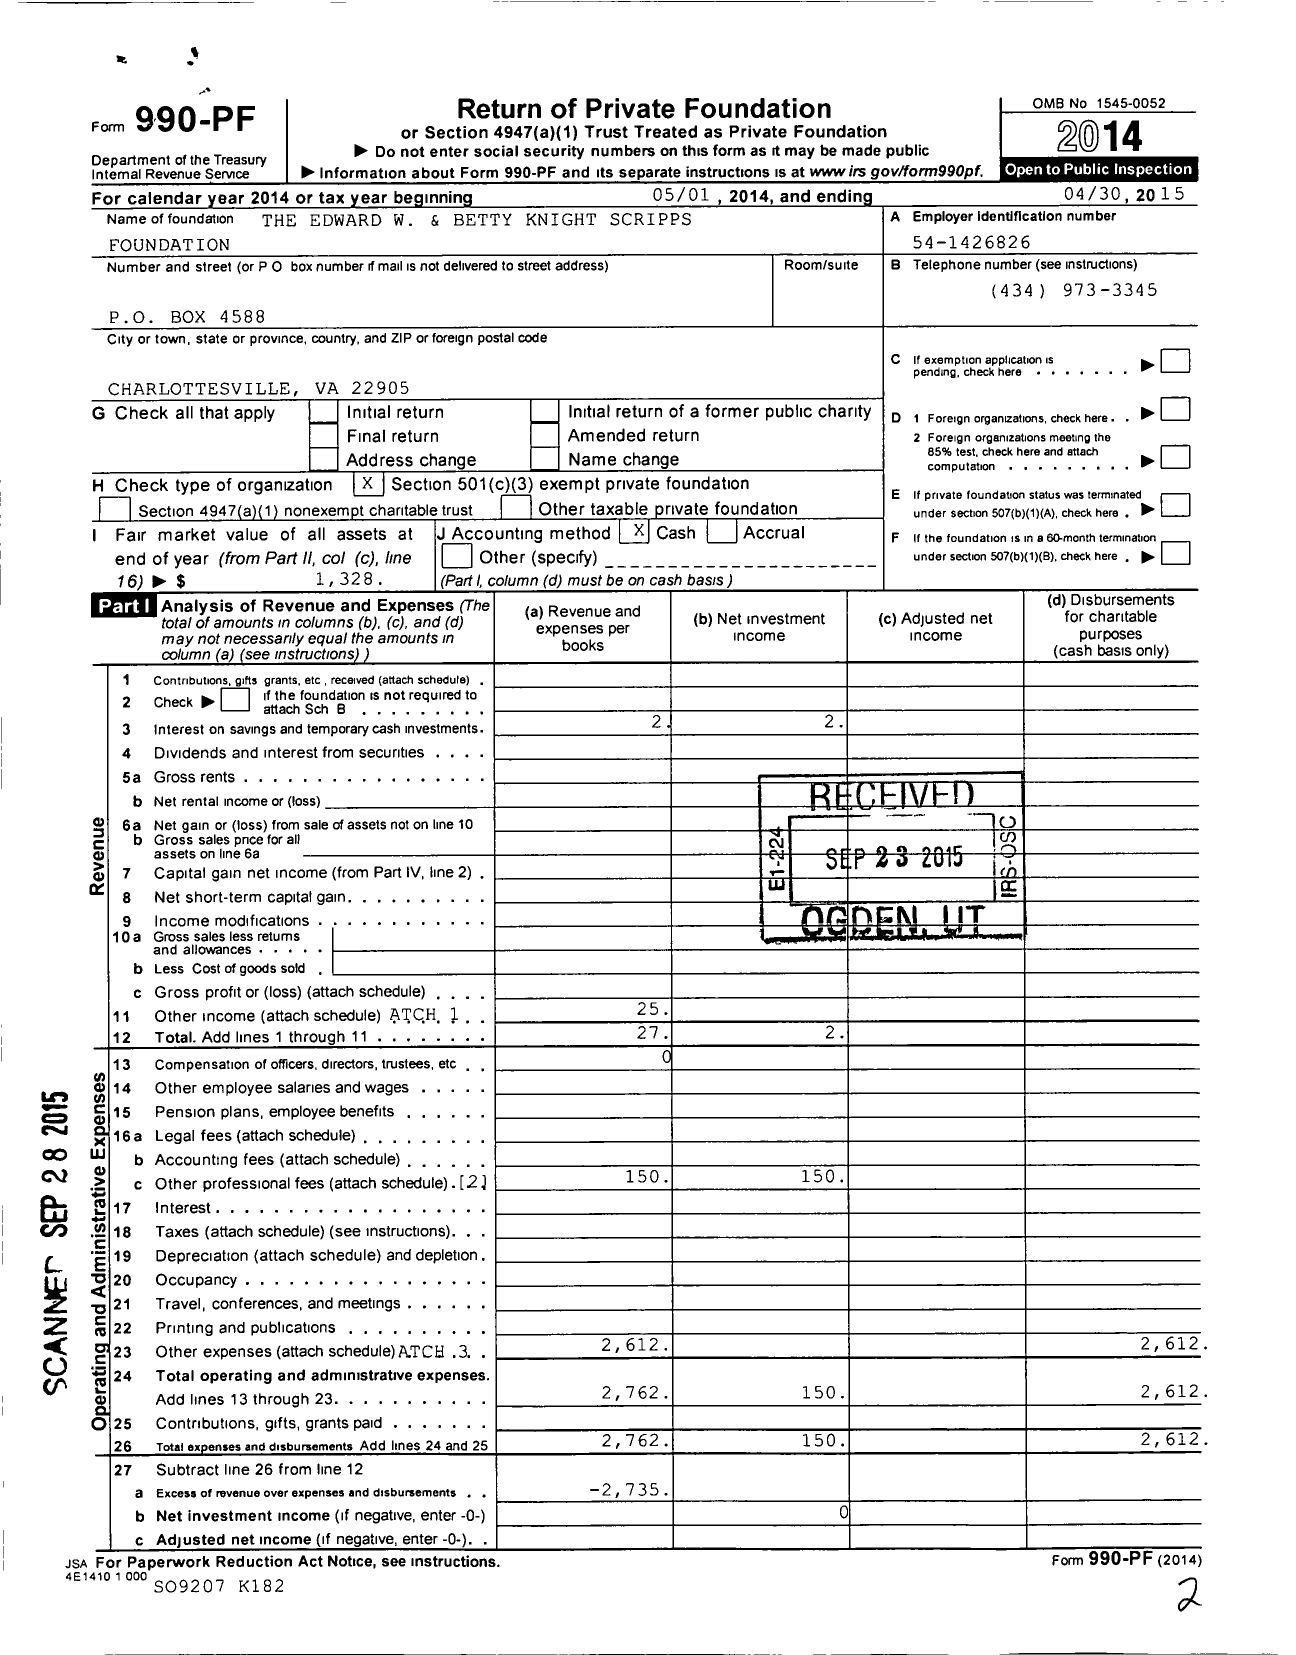 Image of first page of 2014 Form 990PF for The Edward W & Betty Knight Scripps Foundation